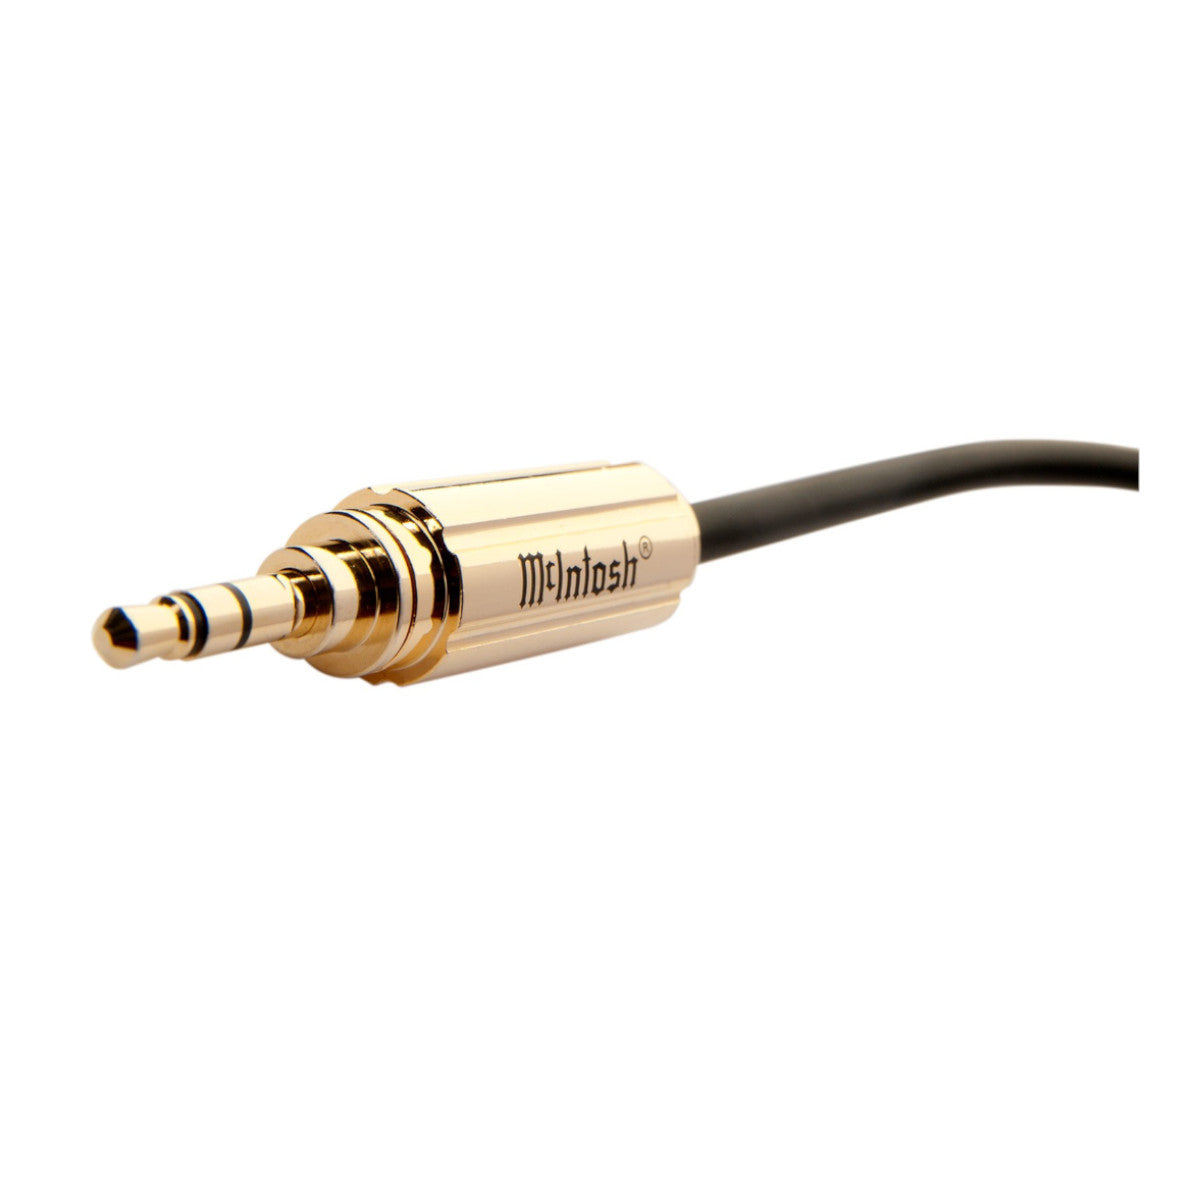 McIntosh Power Control Cables - Single (1mtr to 4mtr) - Ooberpad India